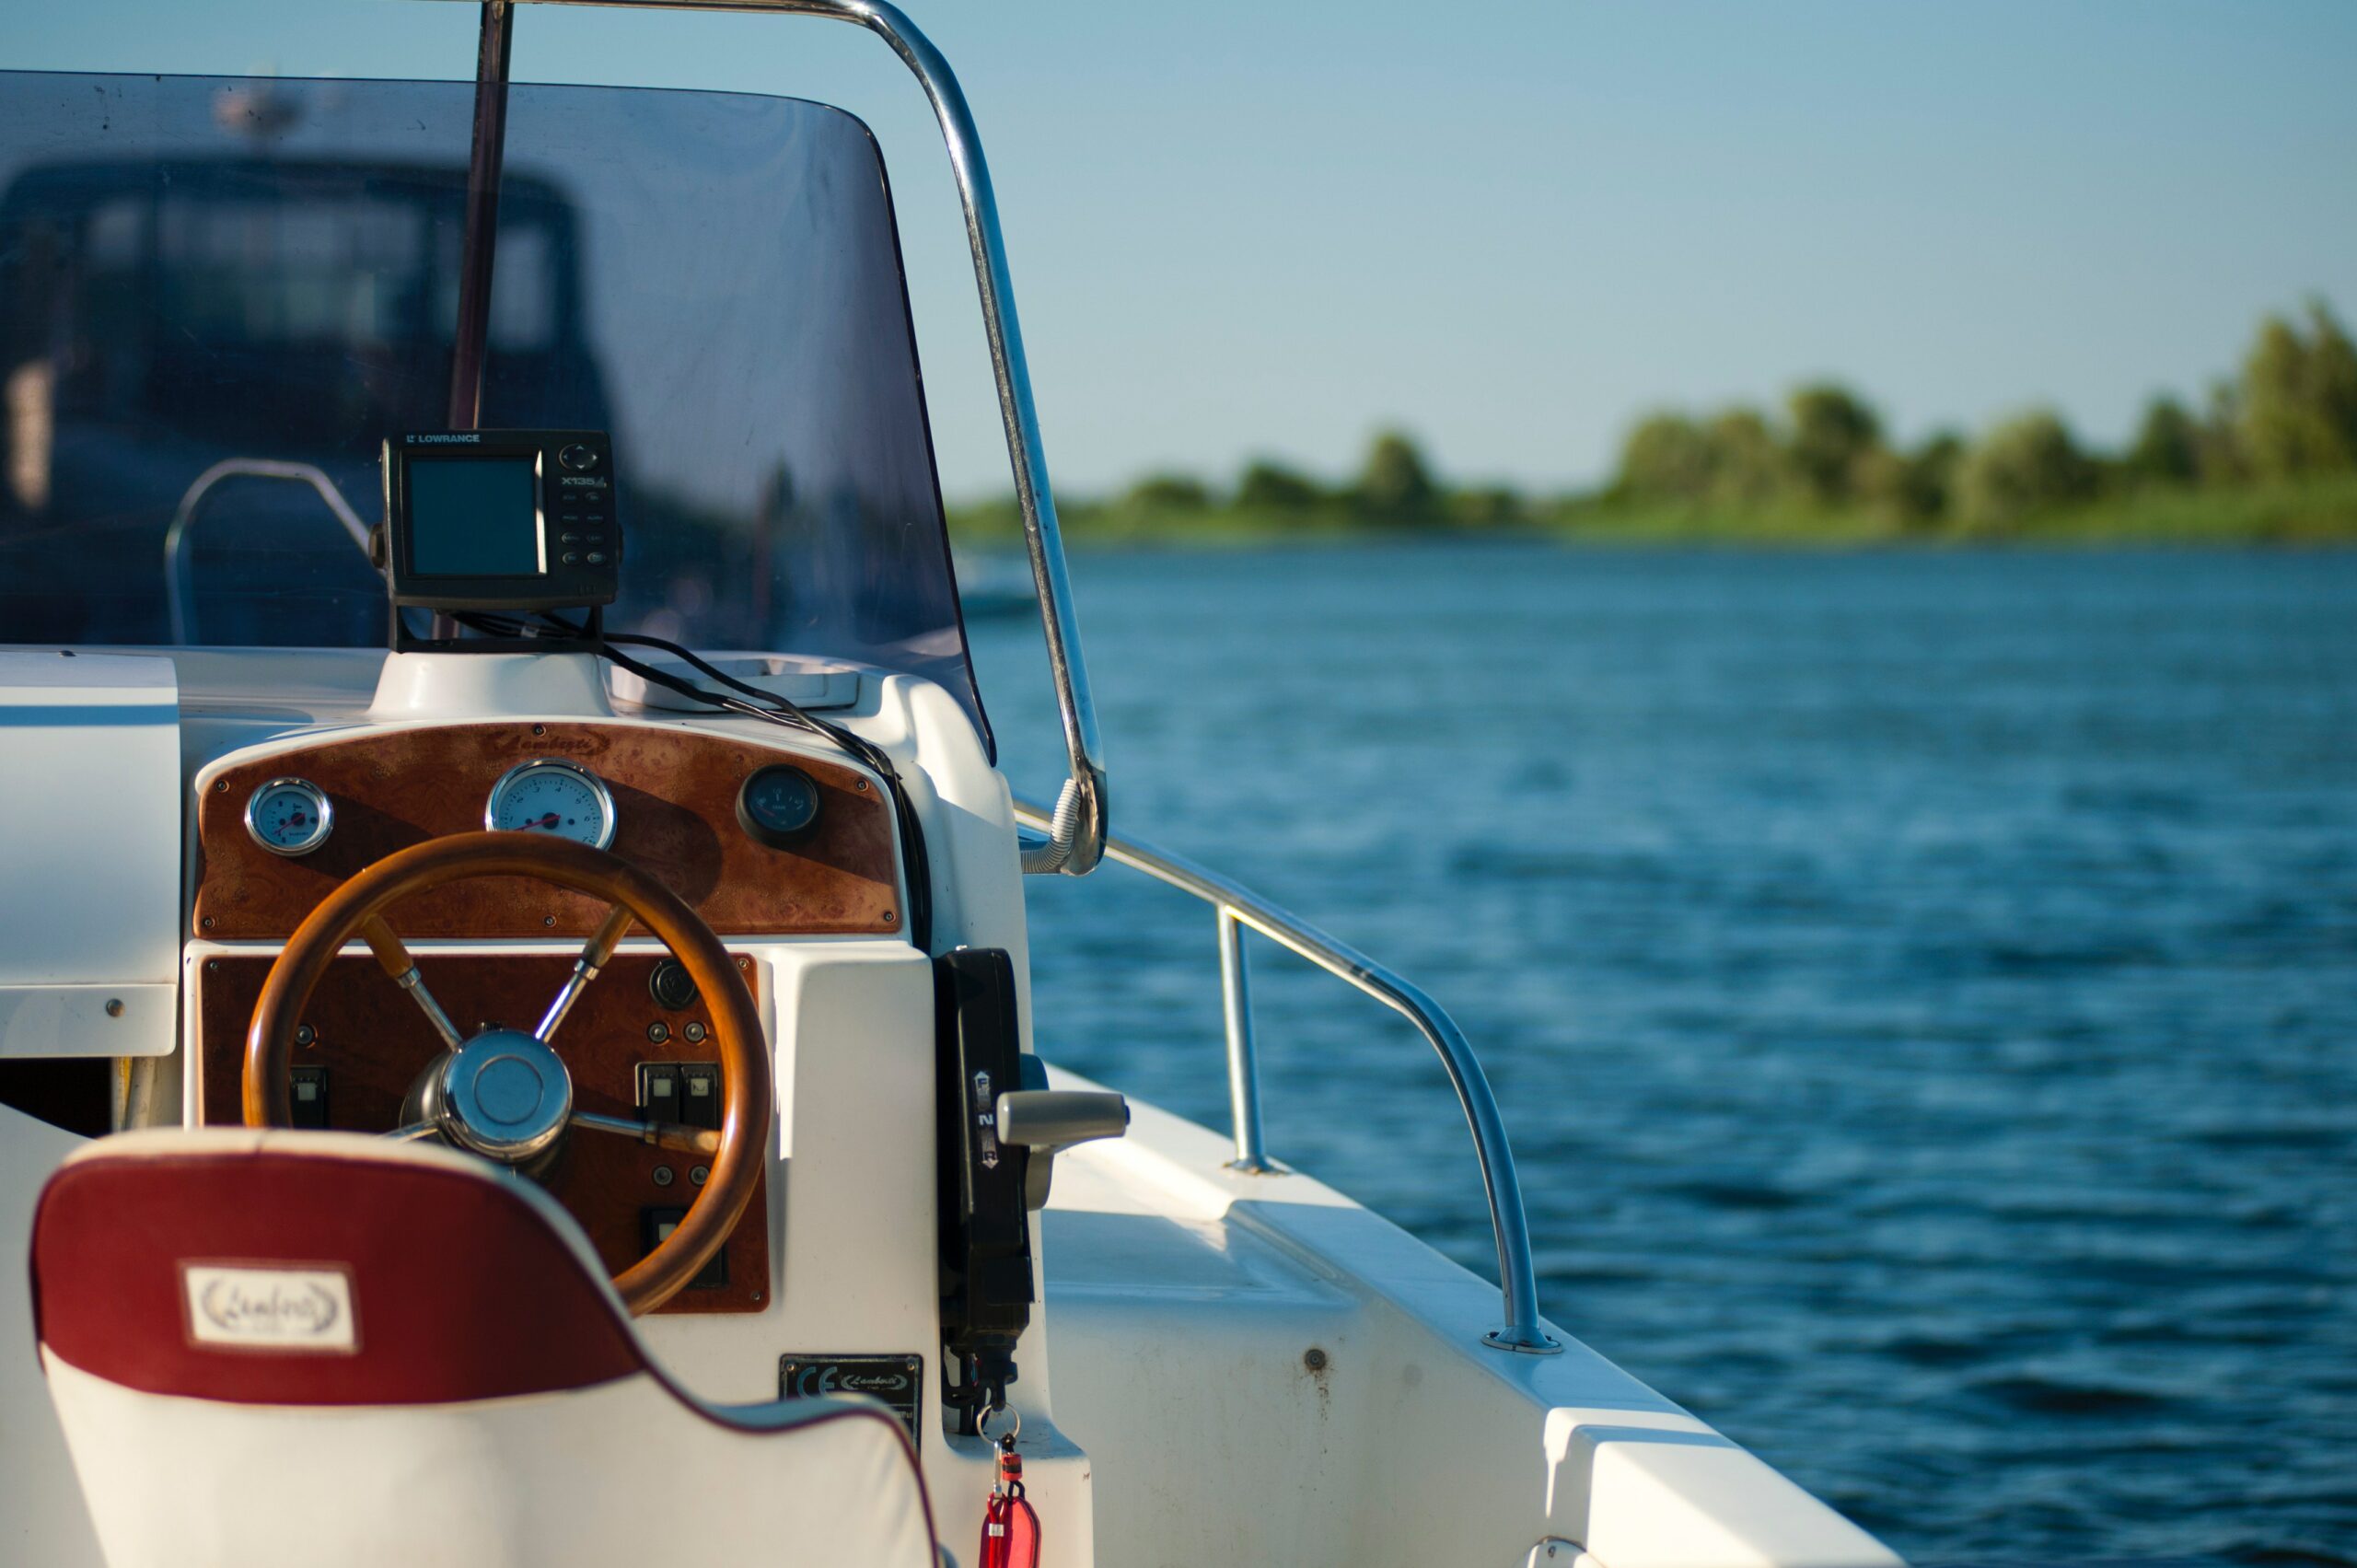 Public affairs: Boating safety 101 by Mattison Holland